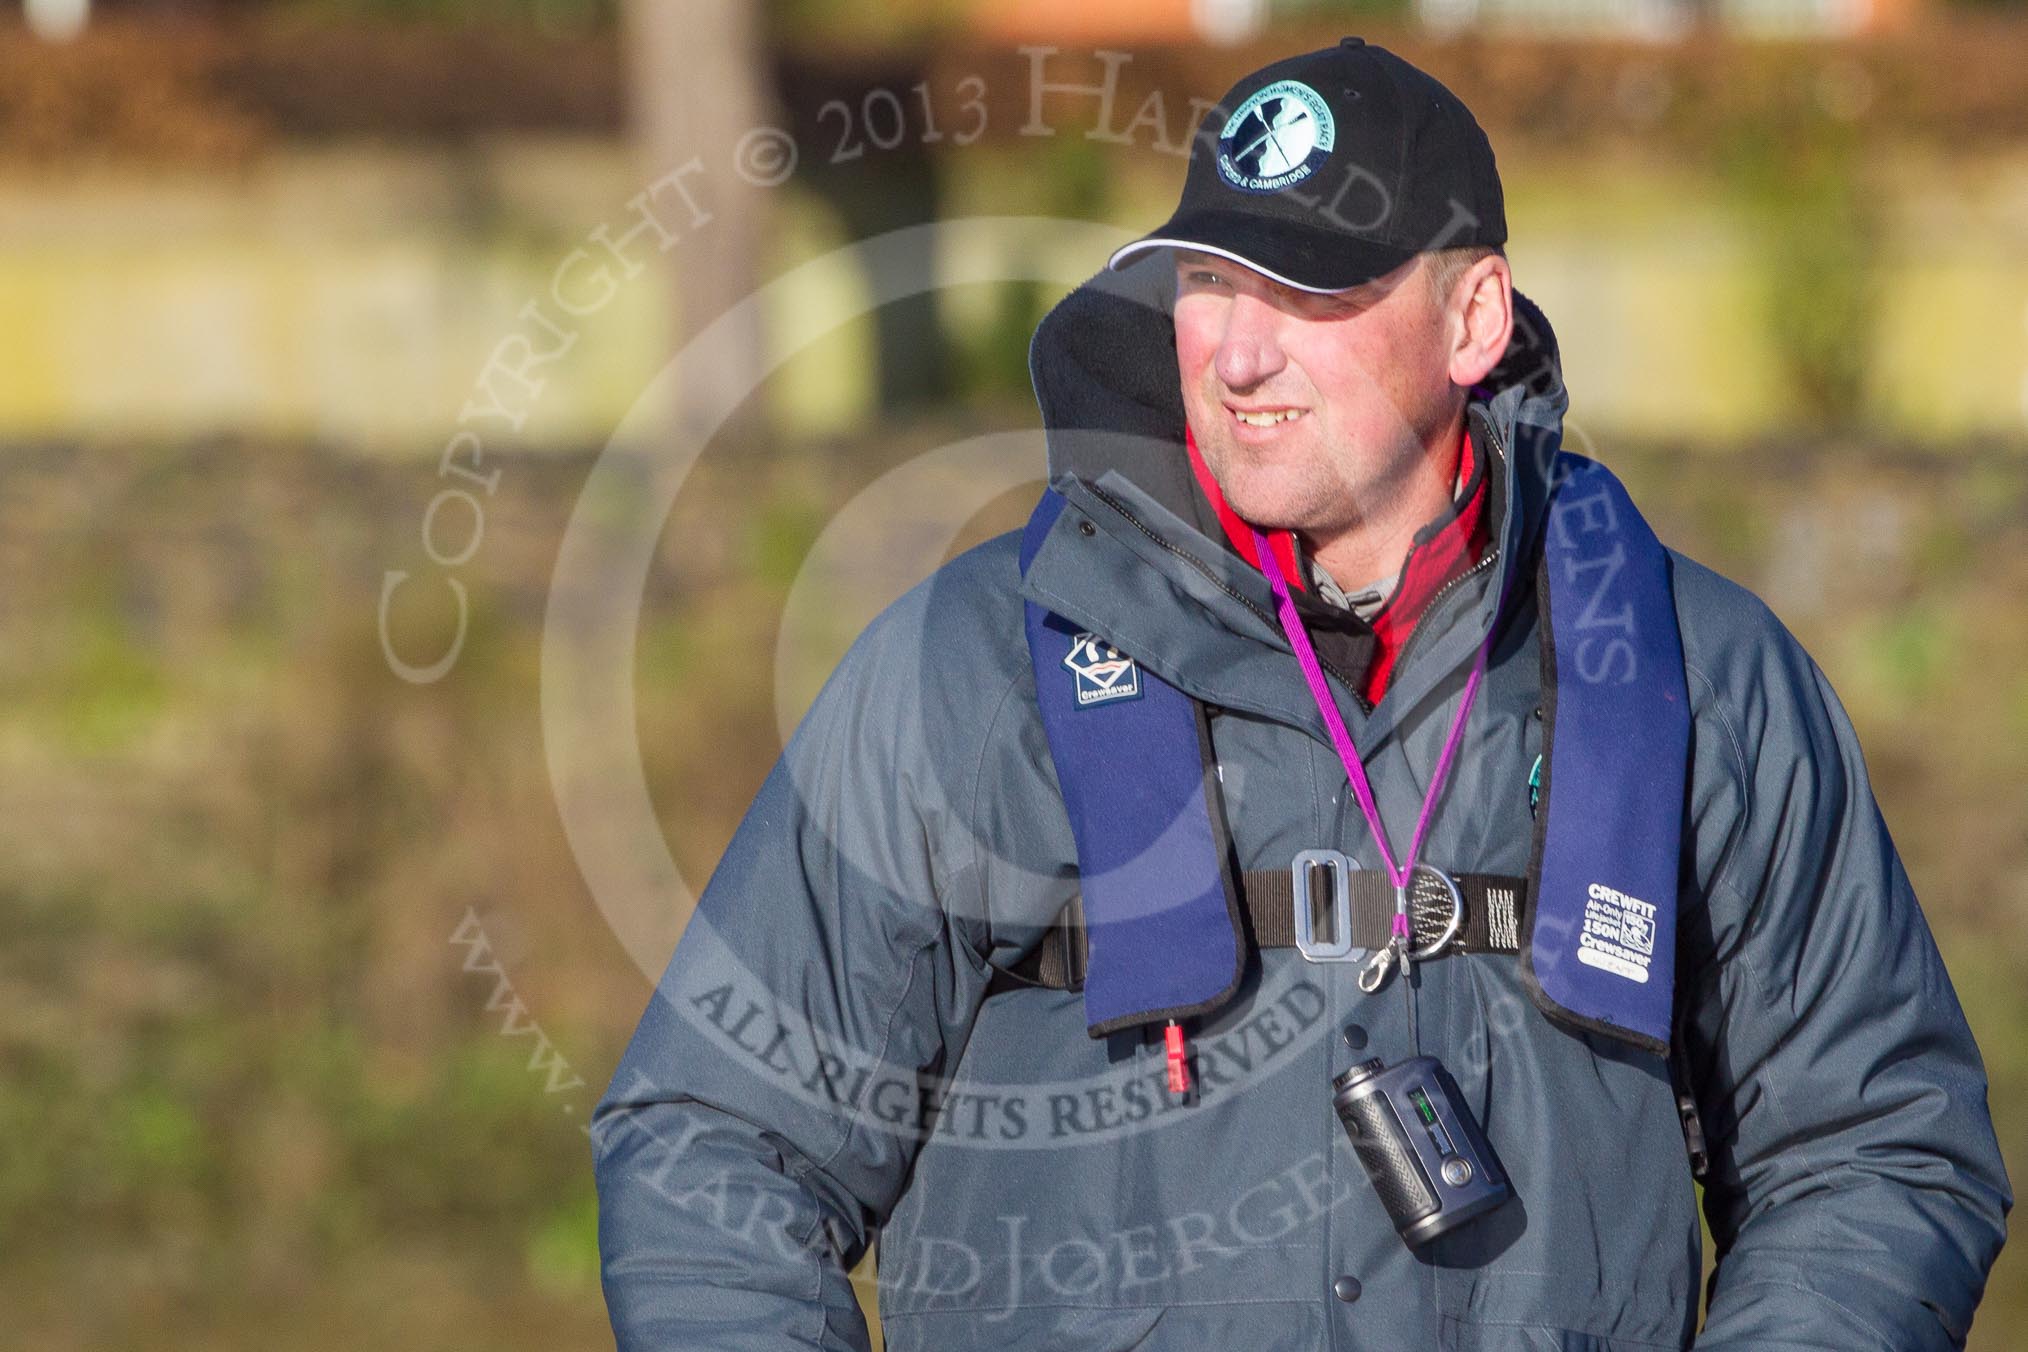 The Boat Race season 2014 - Women's Trial VIIIs (OUWBC, Oxford): Sir Matthew Pinsent in the umpire's launch..
River Thames between Putney Bridge and Mortlake,
London SW15,

United Kingdom,
on 19 December 2013 at 12:34, image #31